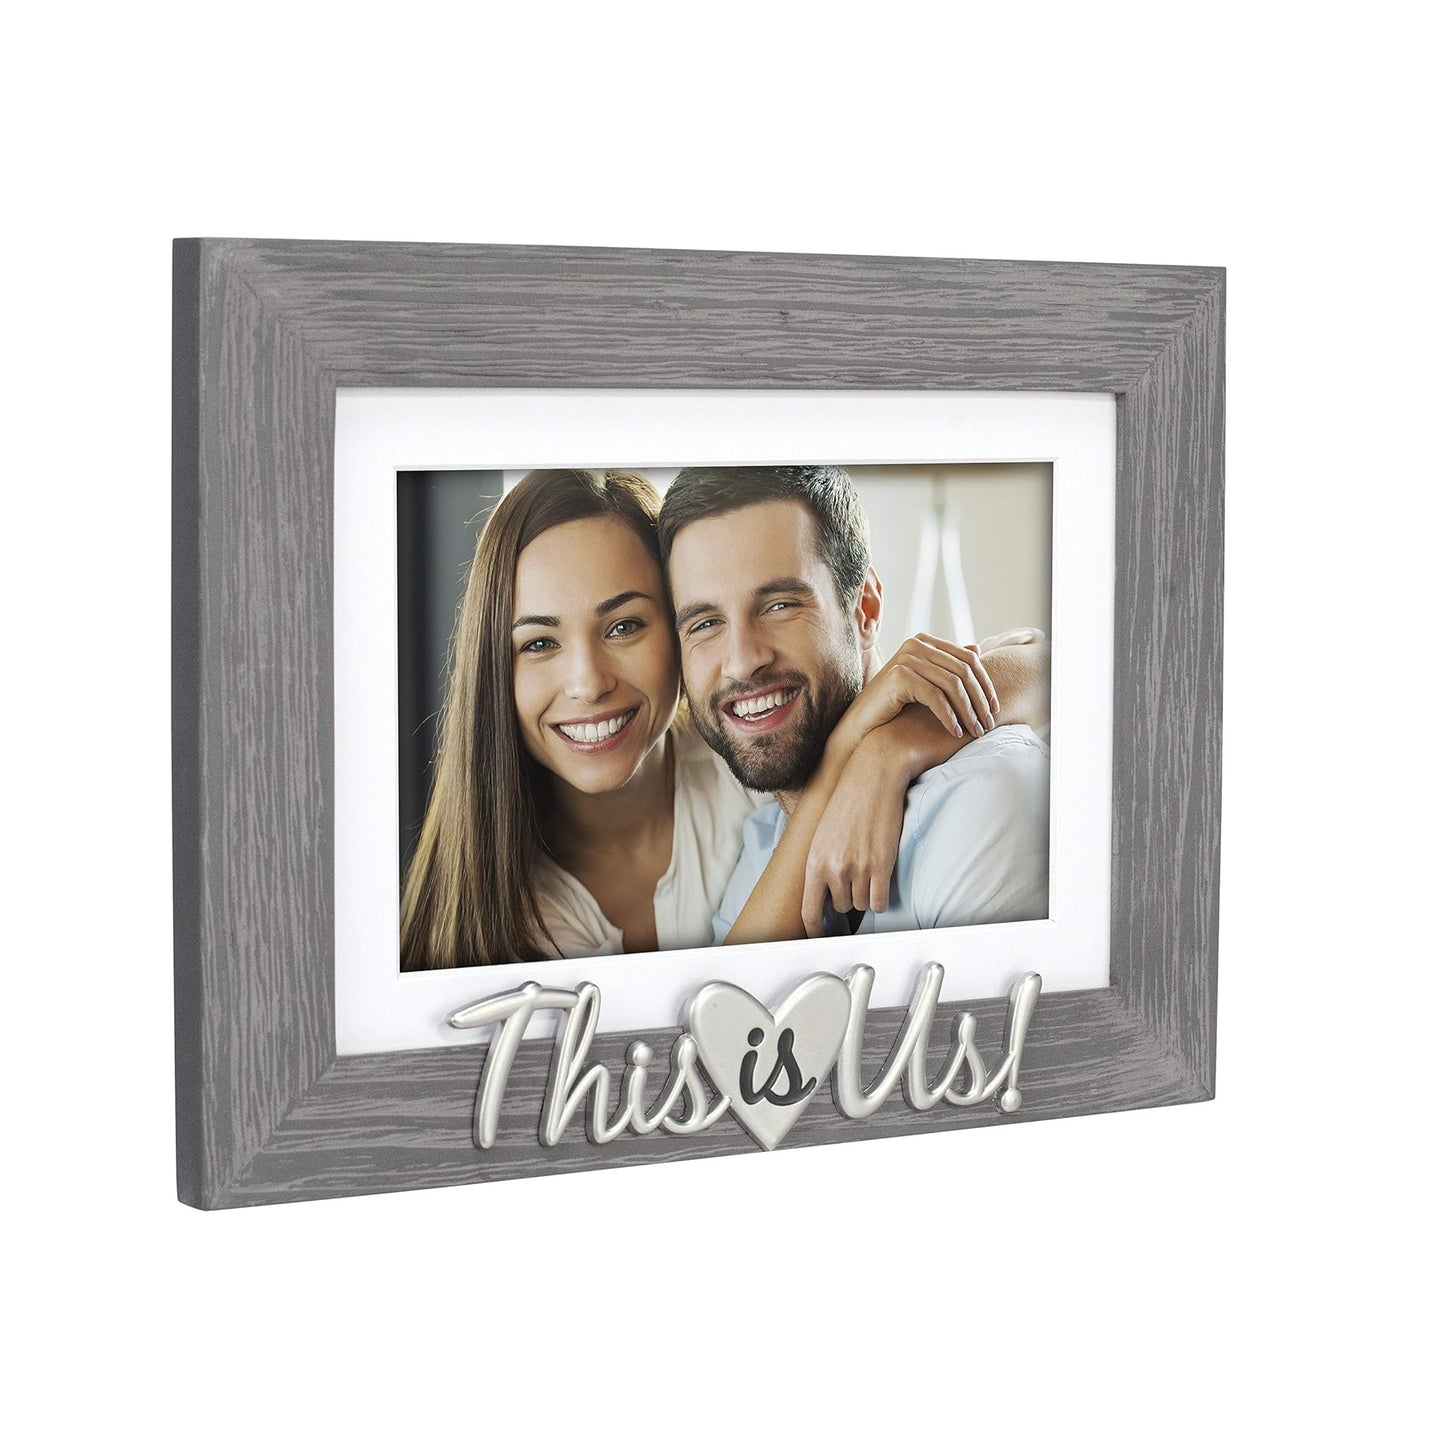 Malden "This is us" Sunwashed Wood Photo Frame